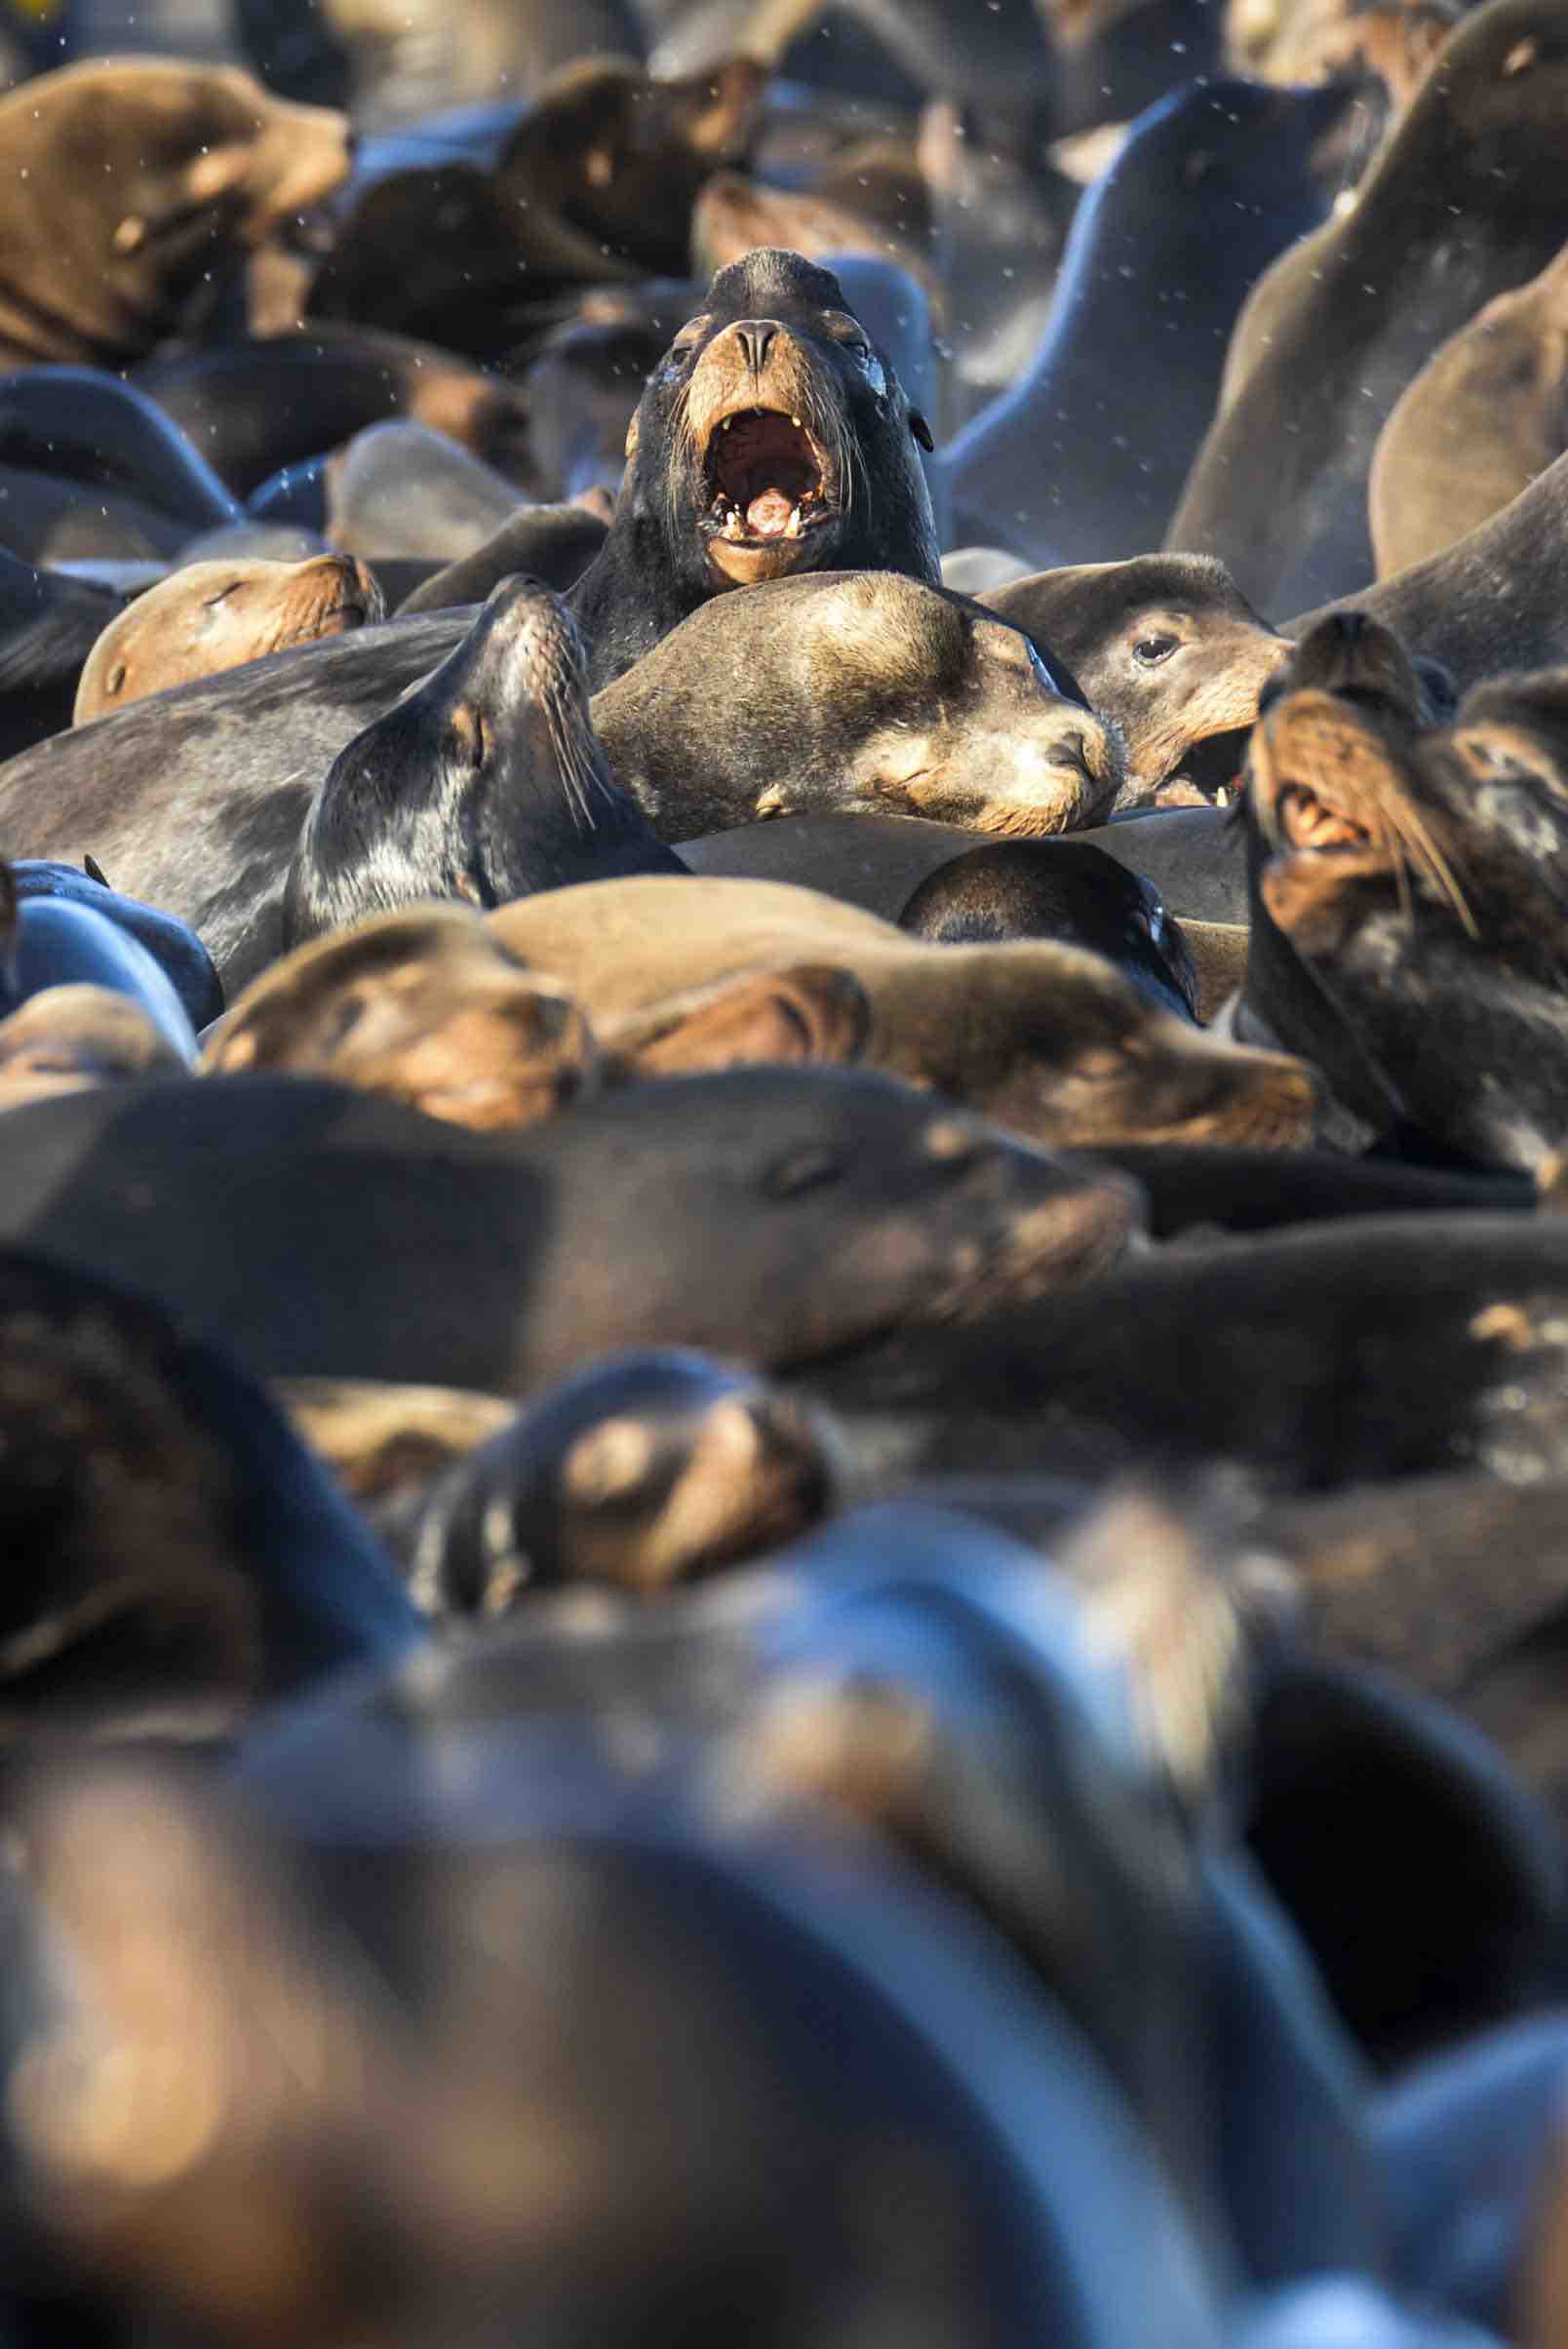 Sea lions make for entertaining viewing on some local waterfronts, but consume many fish, including some protected by the Endangered Species Act. (Joshua Bessexieo photo)